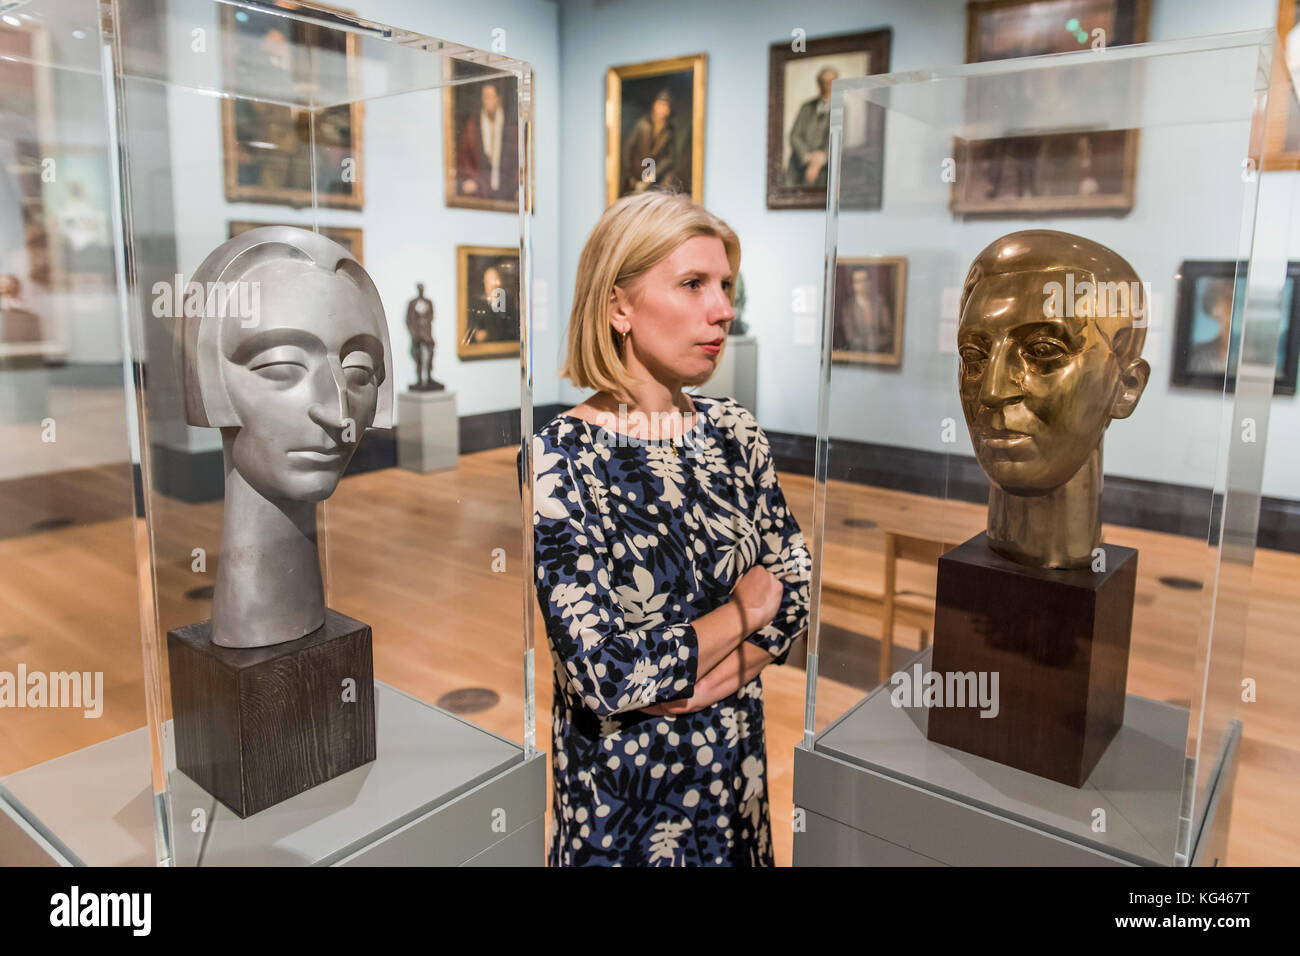 London, UK. 3rd November, 2017. Dame Edith Sitwell, by Maurice Lambert, and Sir Osbert Sitwell, by Frank Dobson, and other works - The National Portrait Gallery, London opens brand new gallery spaces devoted to its early 20th Century Collection on 4 November 2017. The creation of these new spaces within the Gallery's free permanent Collection, has been made possible by a grant from the DCMS/ Wolfson Museums & Galleries Improvement Fund. London 03 Nov 2017. Credit: Guy Bell/Alamy Live News Stock Photo